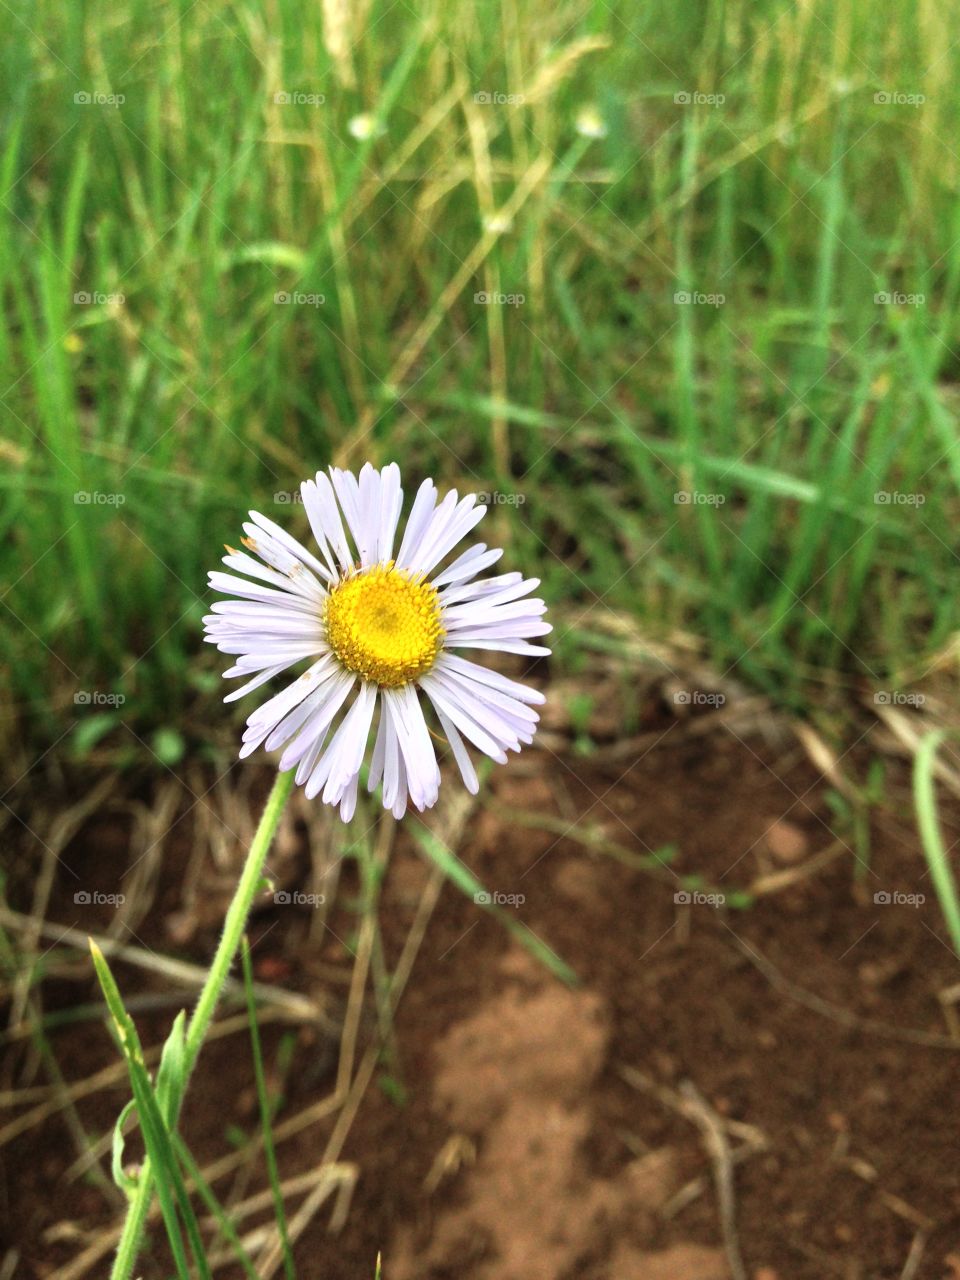 Mountain daisy. Found this lone daisy on a mountain at 10,000 feet. 